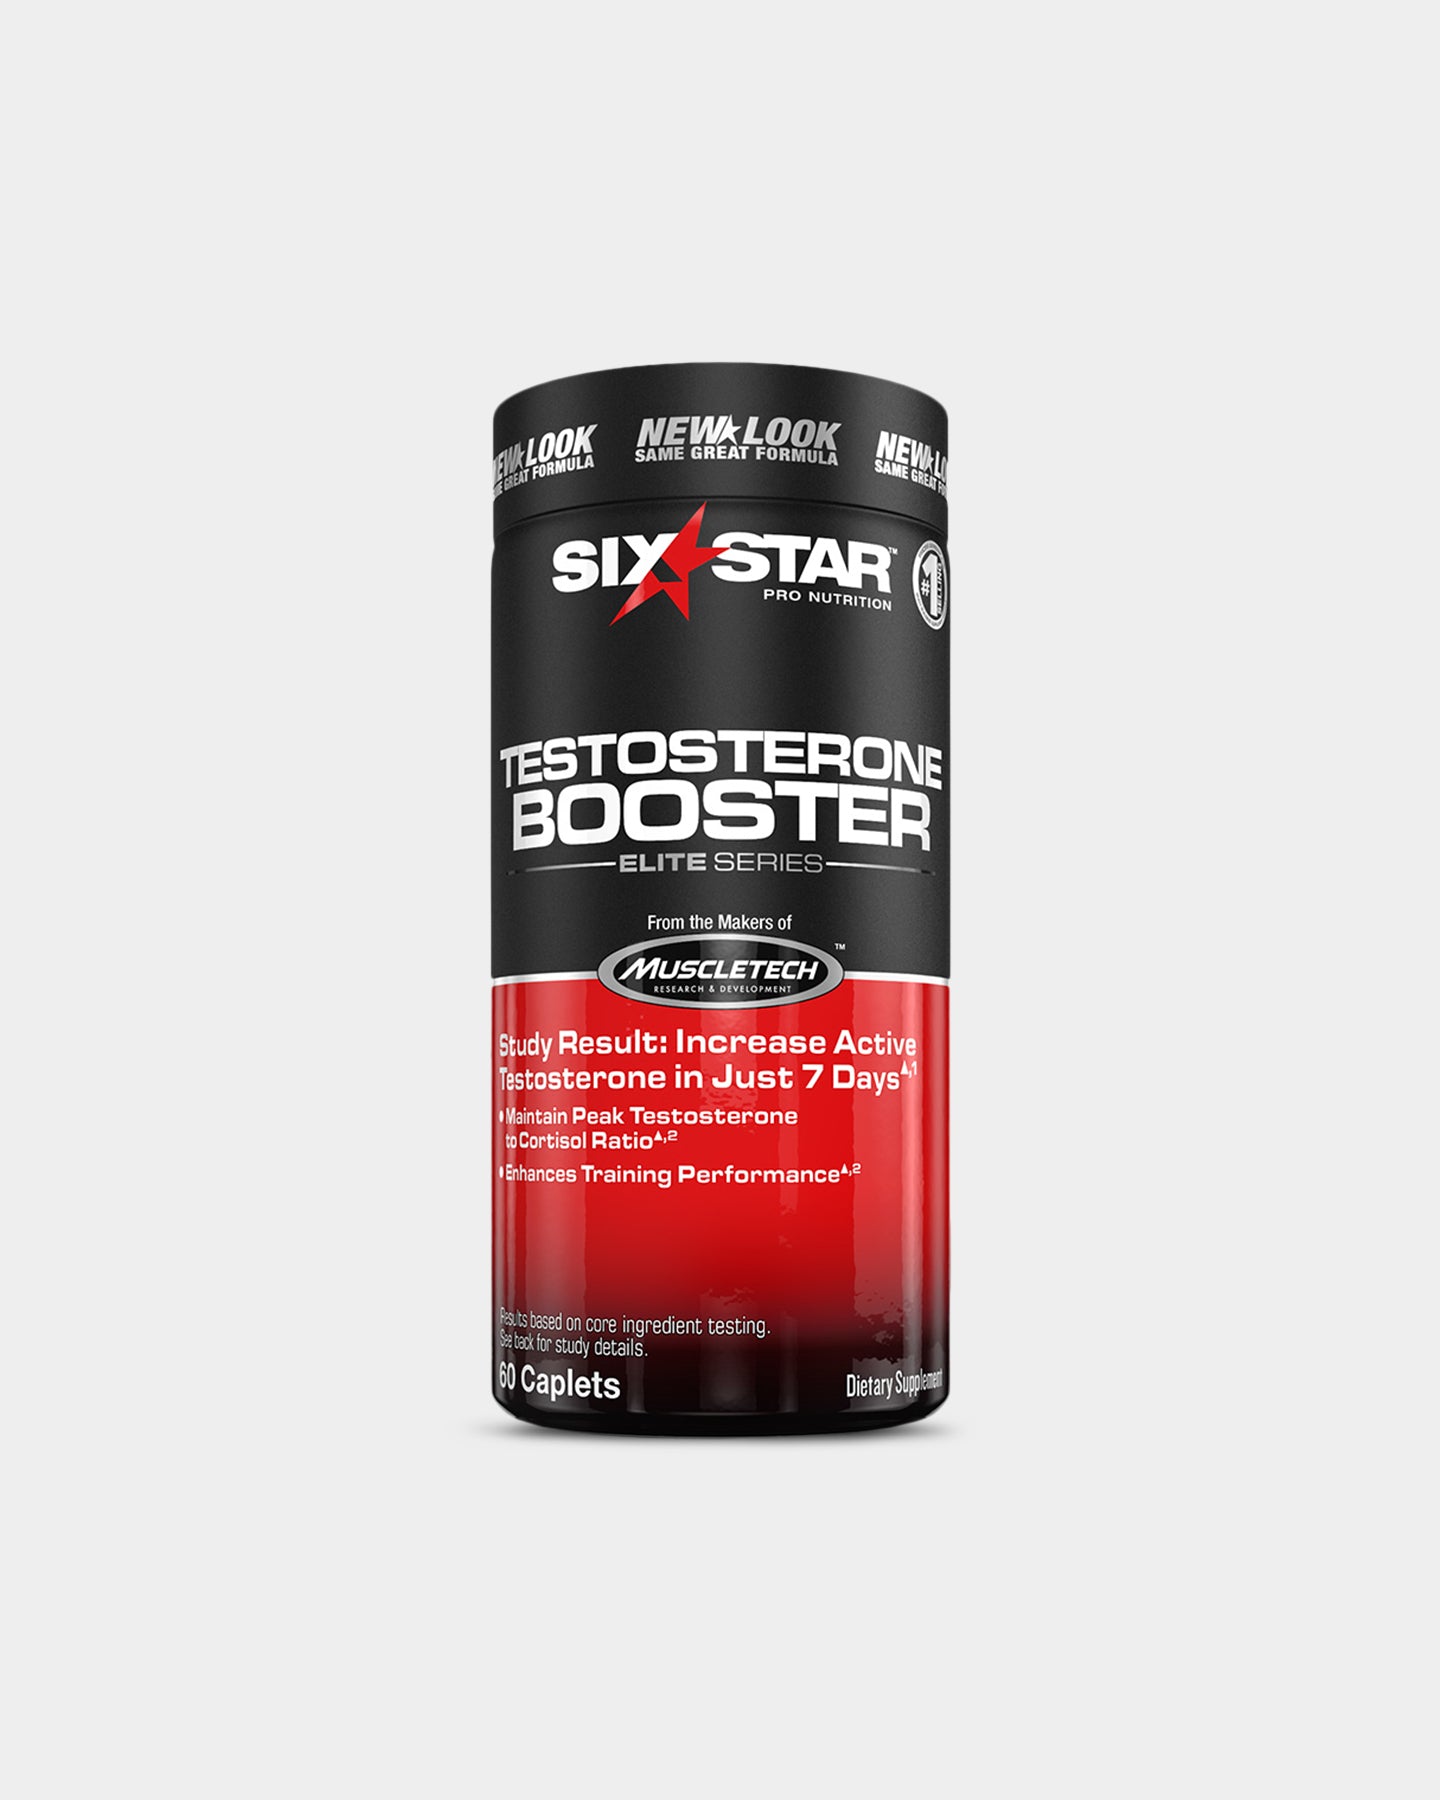 Image of Six Star Pro Nutrition Testosterone Booster